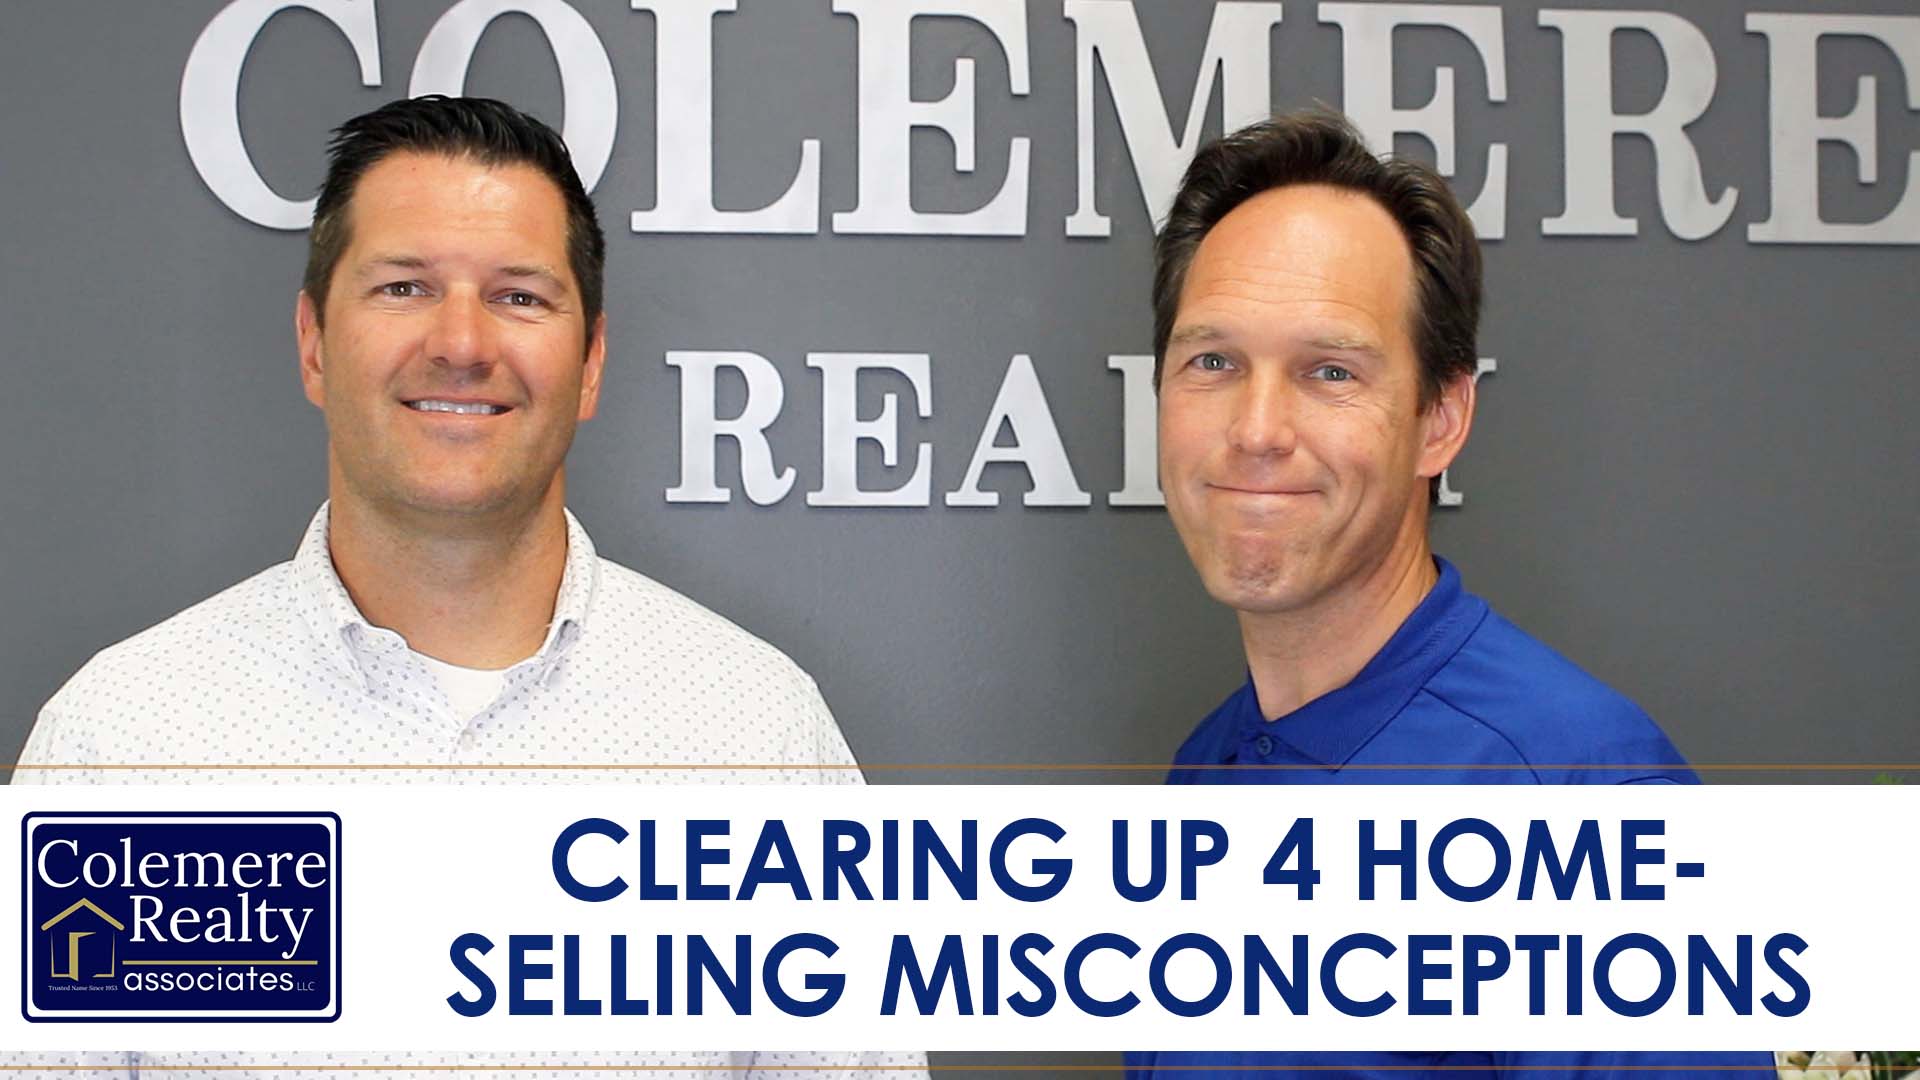 4 Home-Selling Misconceptions We’d Like to Clear Up